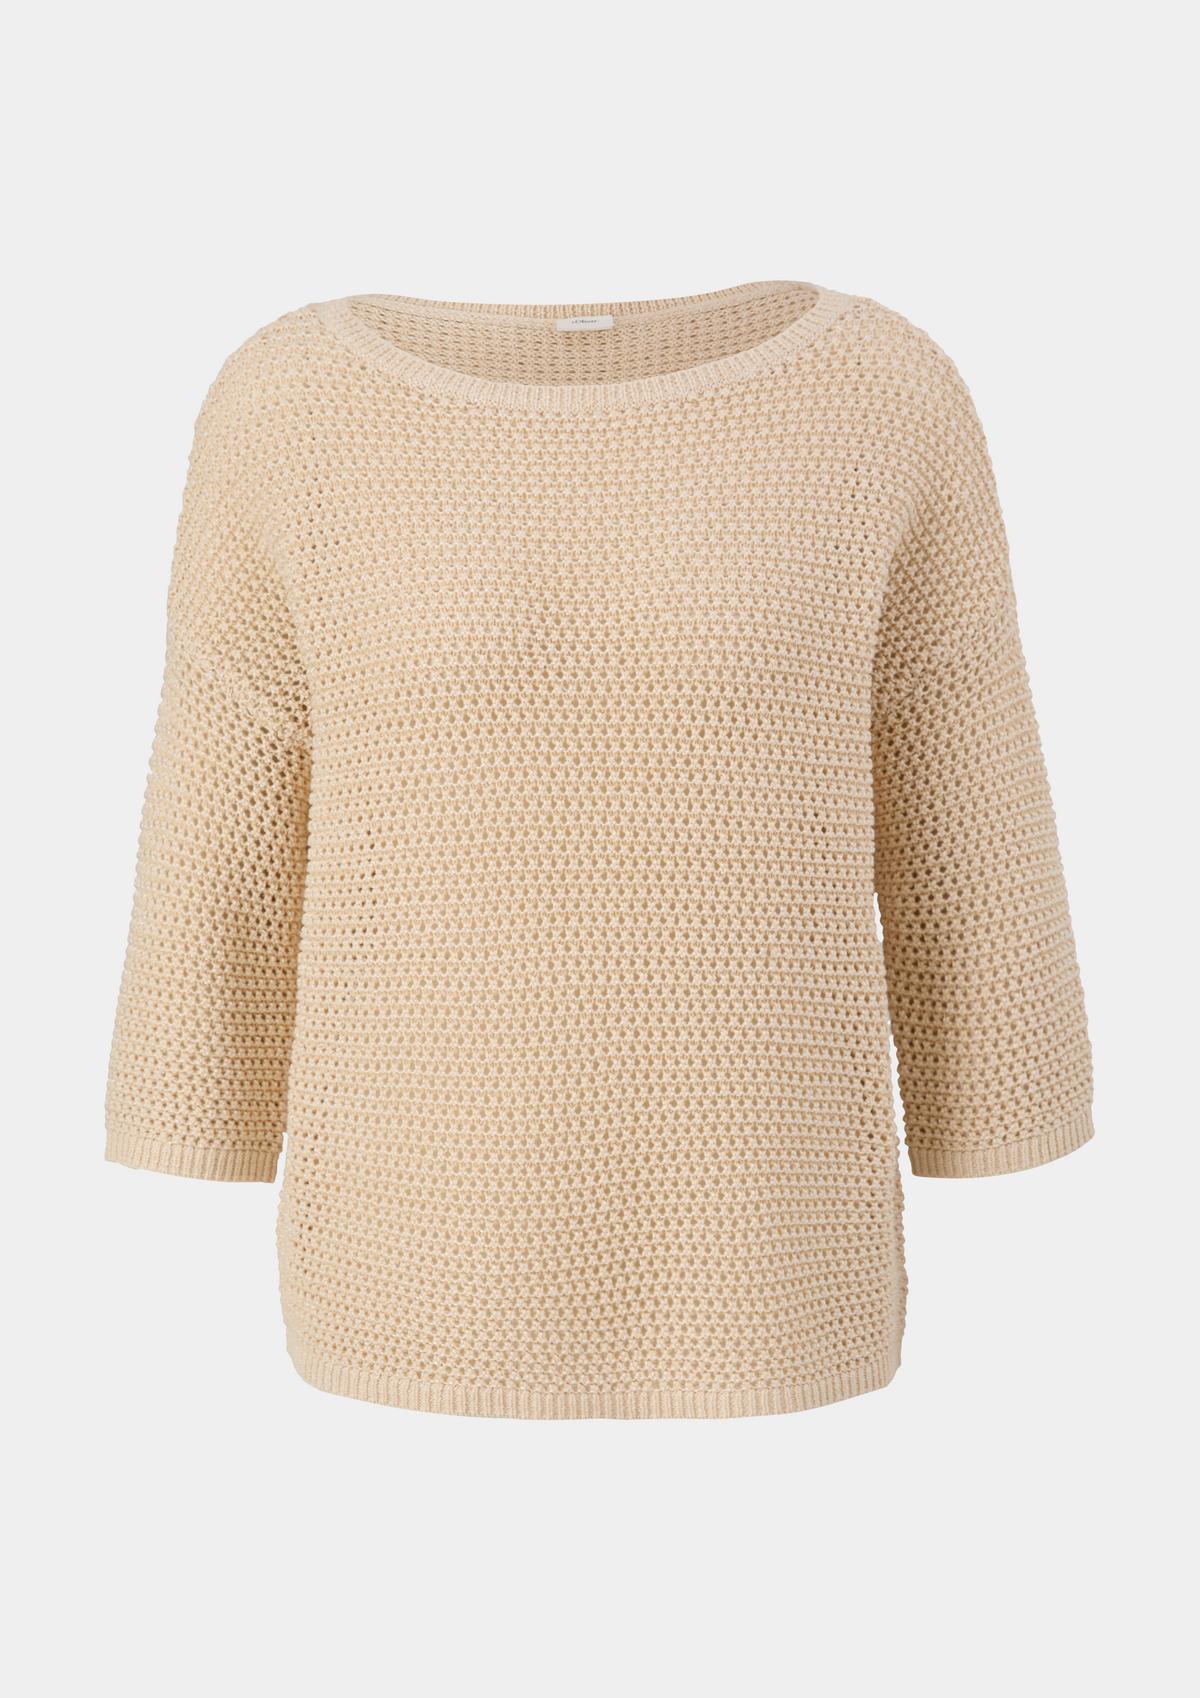 s.Oliver Crocheted knitted jumper